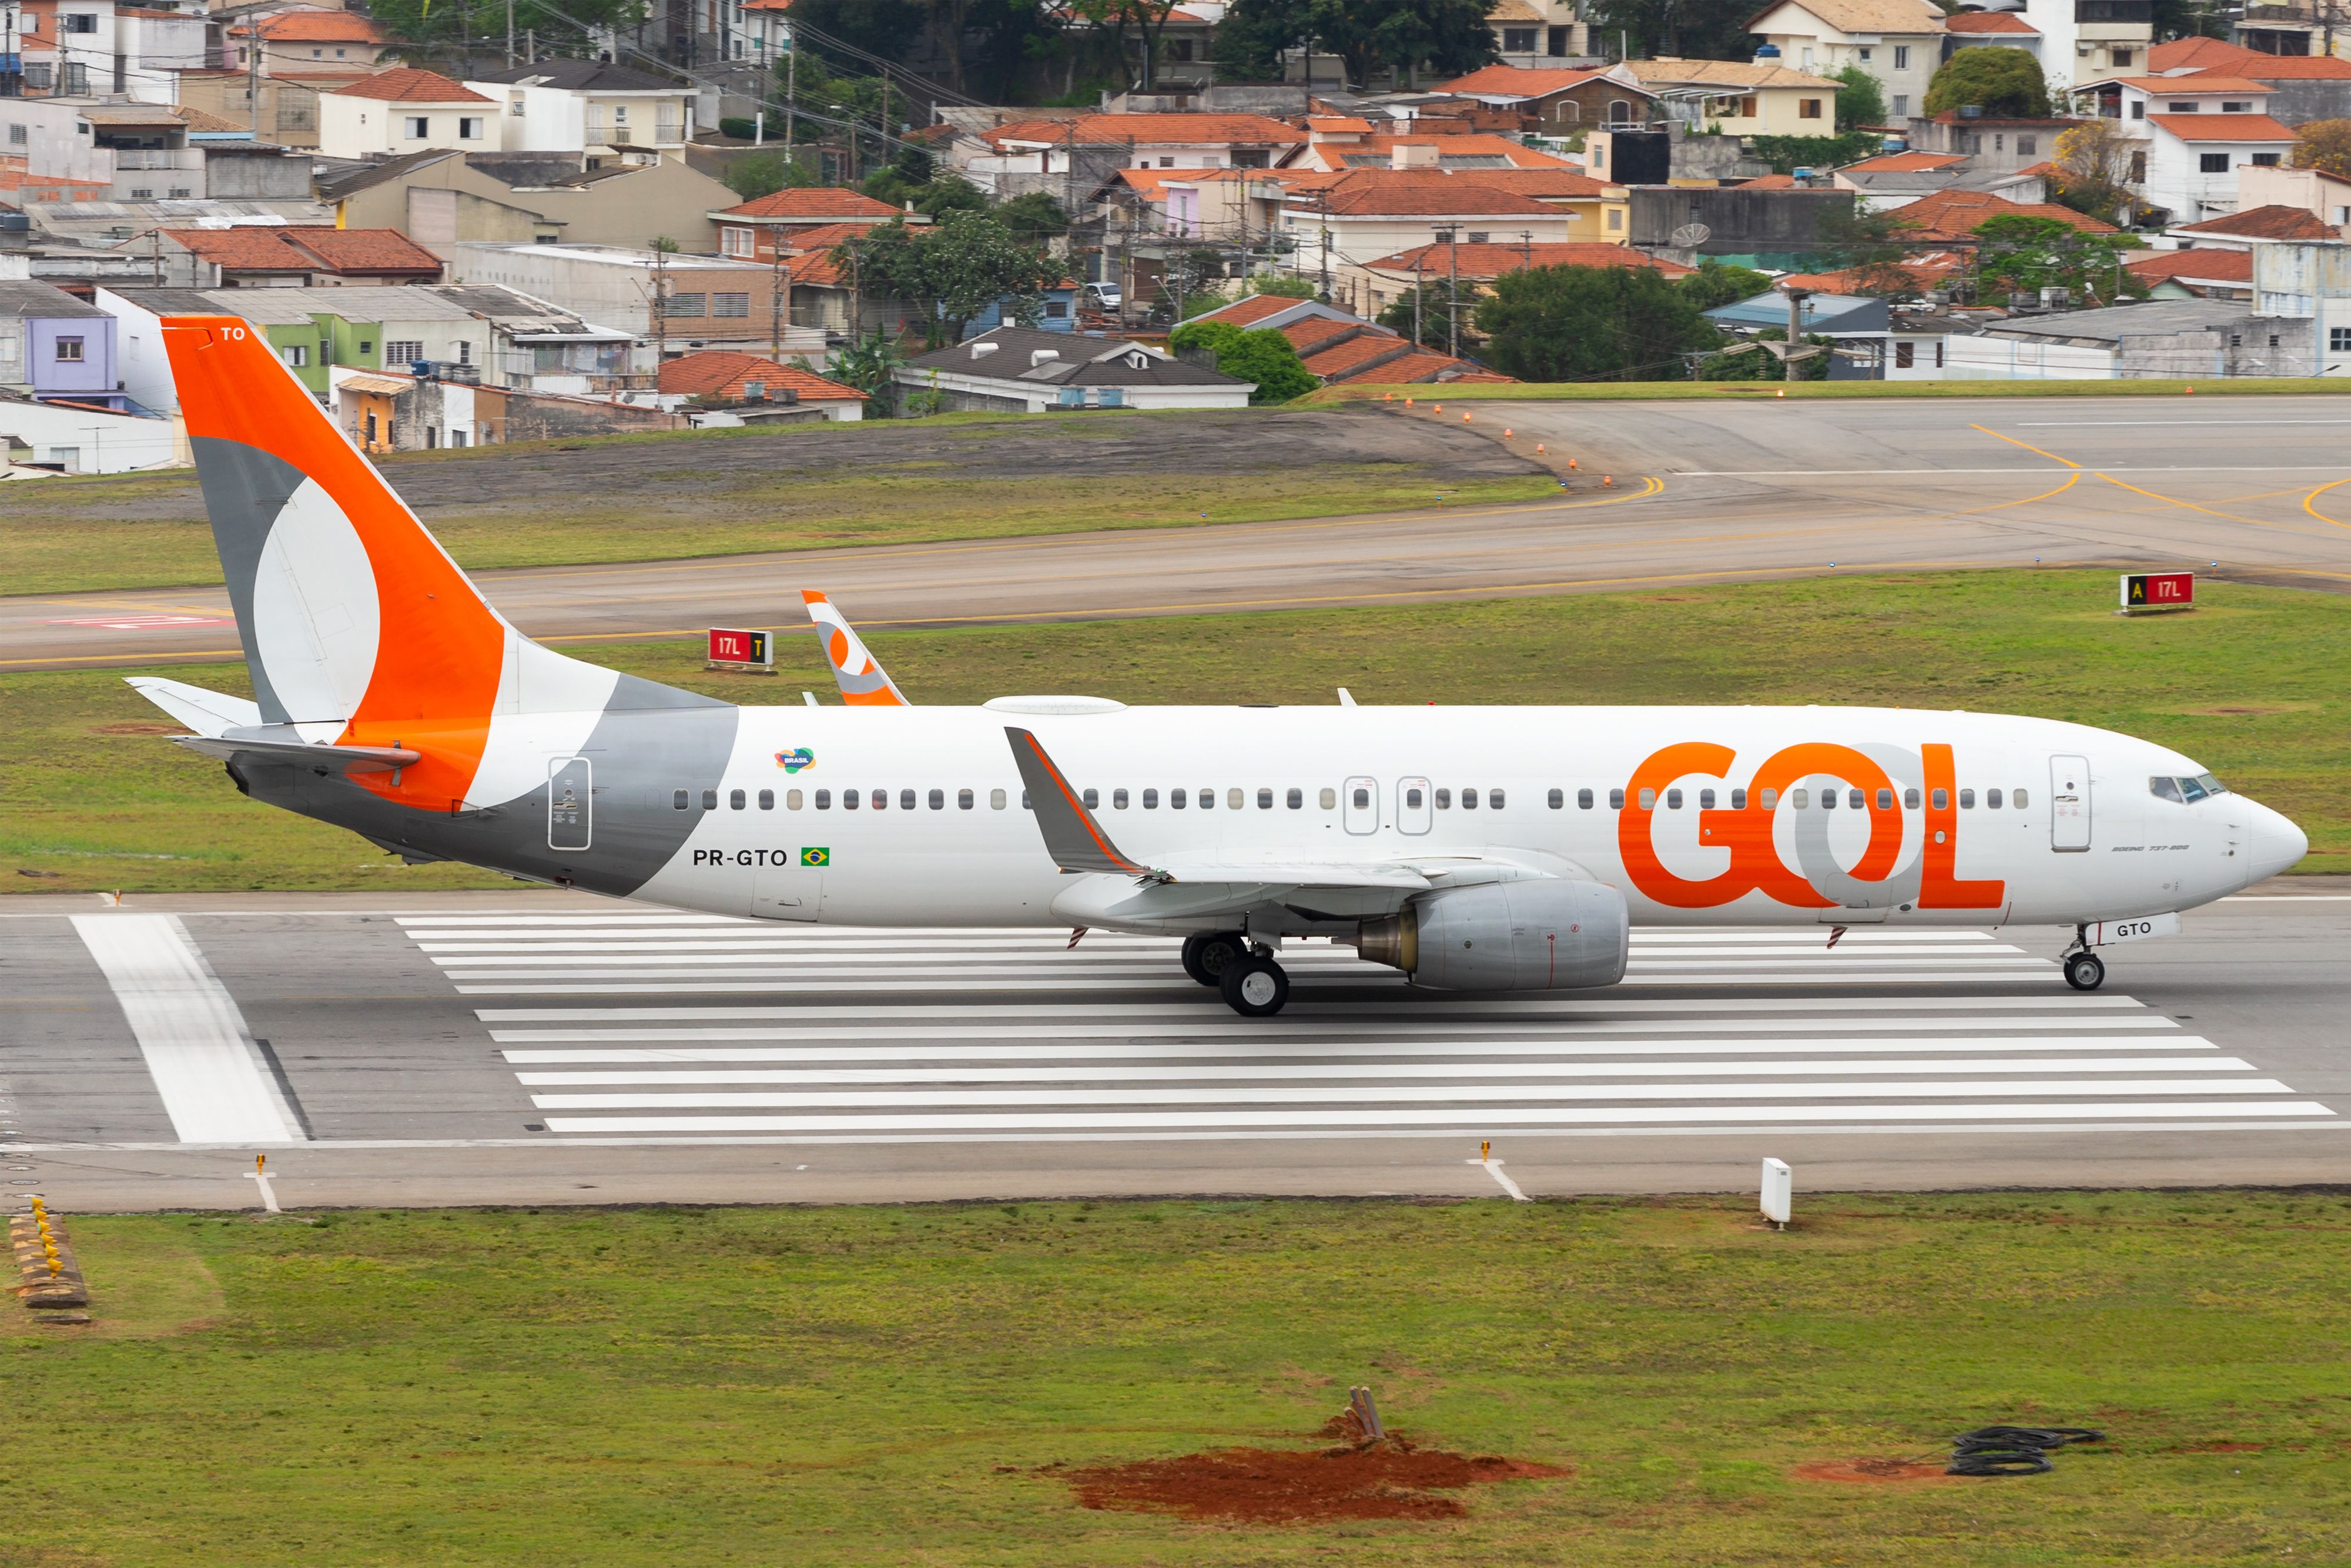 Gol Airlines (Linhas Aéreas) Boeing 737 -800 over the runway threshold of Congonhas (CGH  SBSP) domestic airport. Aircraft registered as PR-GTO.